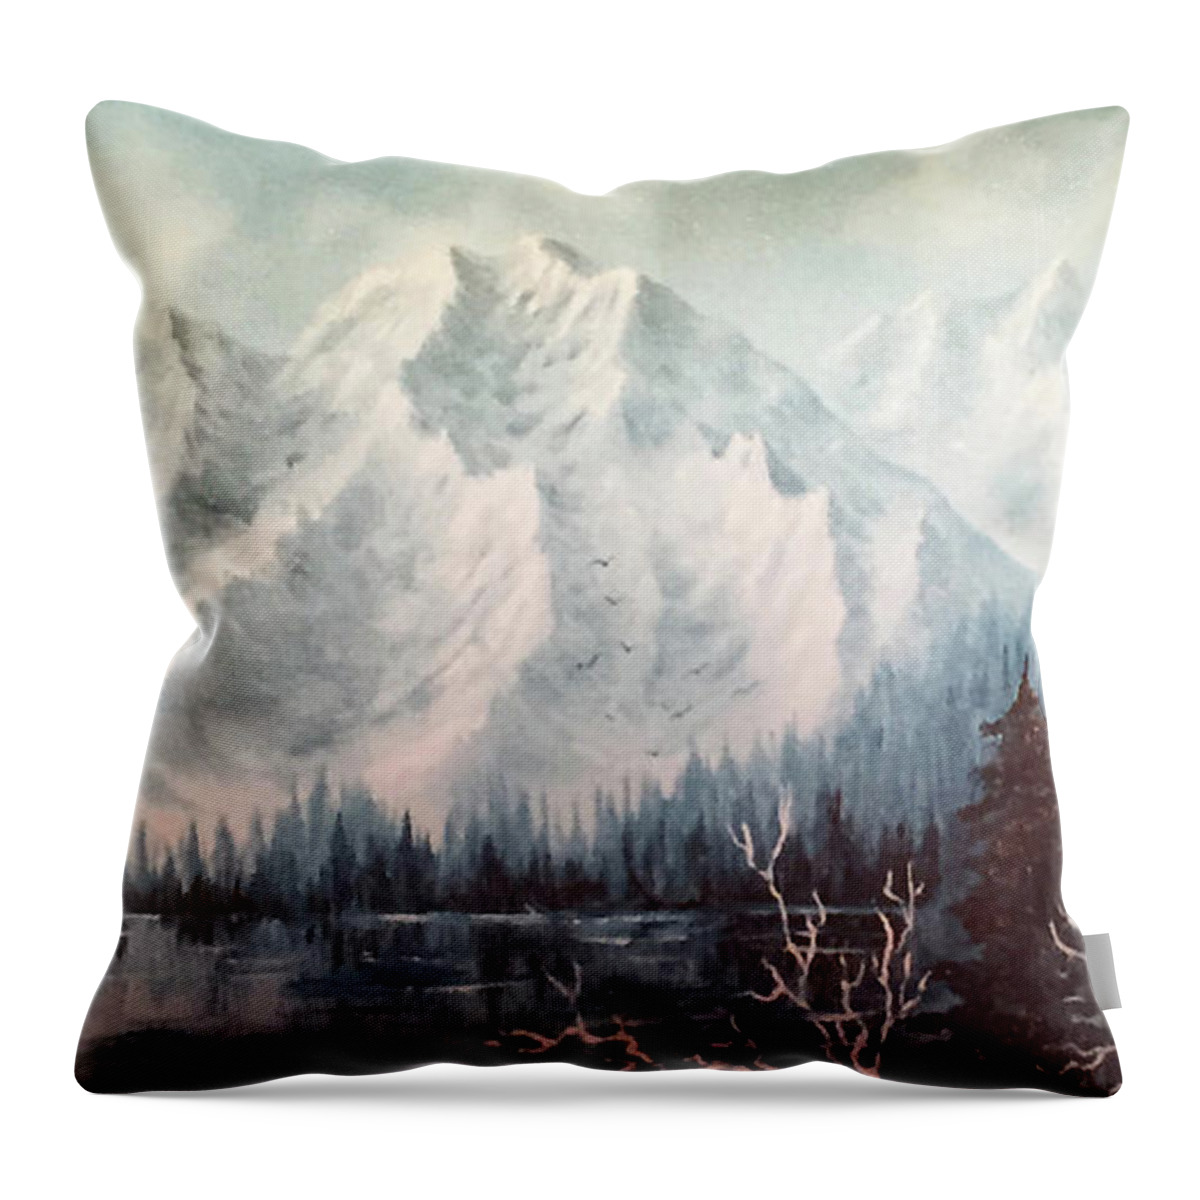 Craggy Mountains Throw Pillow featuring the painting Craggy Mountains by Teresa Ascone